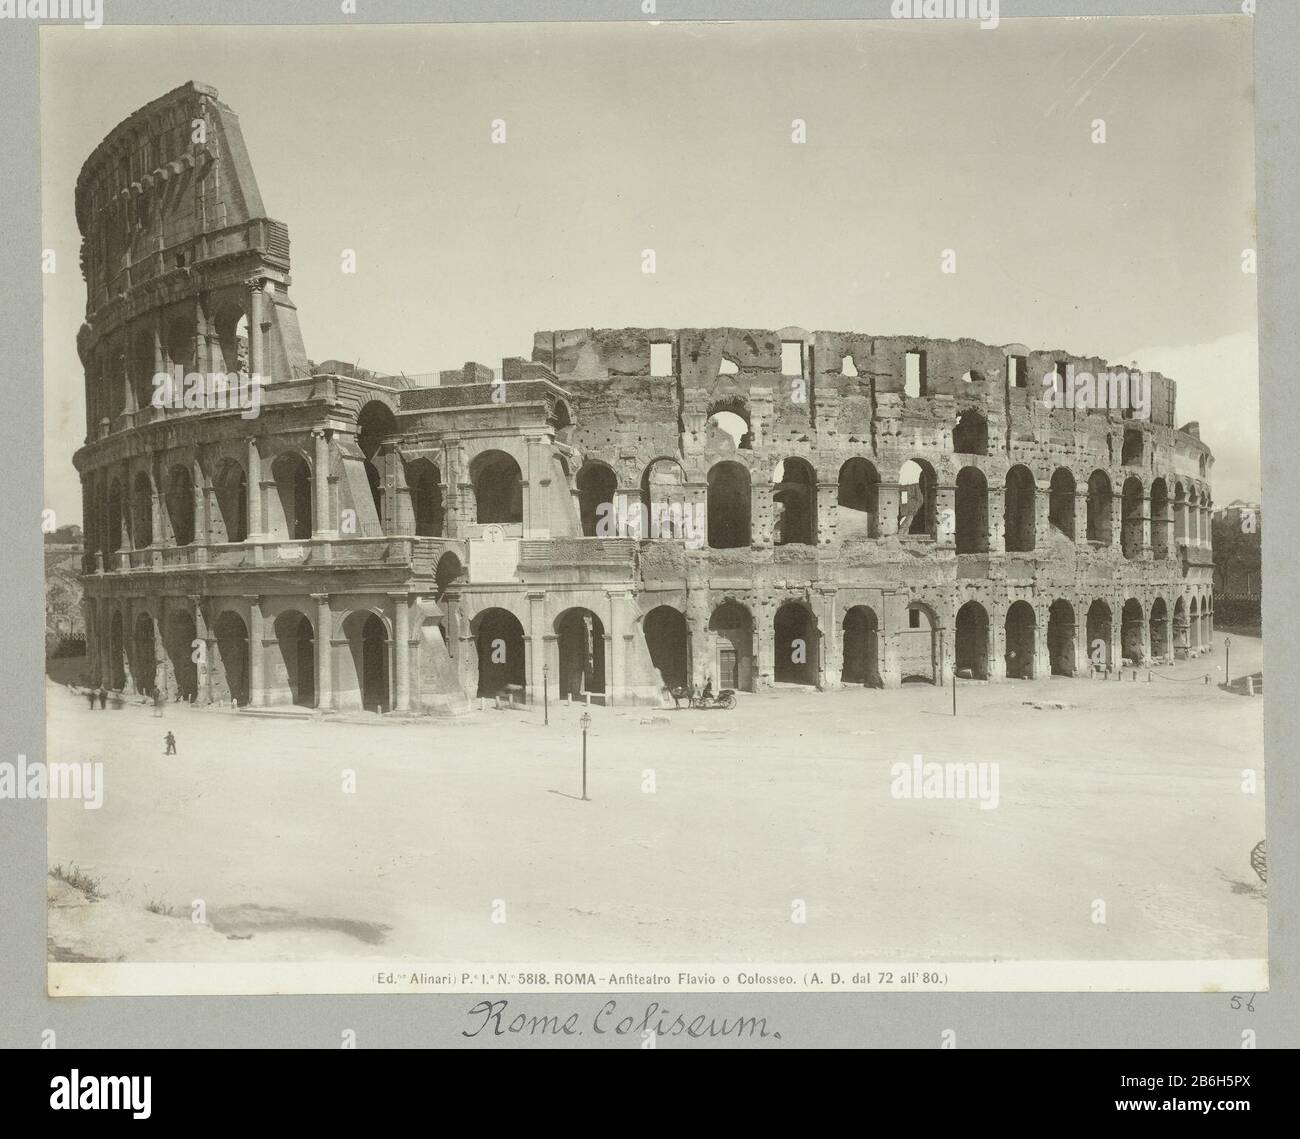 Colosseum in Rome (title object) PIN 5818 Roma Amfiteatro Flavio o colosseo (AD dell 72 all '80) (title object) Colosseum in Rome (title object) P.I.N. 5818 Roma Amfiteatro Flavio o colosseo (A.D. dell 72 all '80). (Title object) Property Type: photographs Item number: RP-F 2007-358-56 Manufacturer : Photographer: Fratelli Alinari (listed property) Place manufacture: Photographer: Rome Netherlands Dating: ca. 1893 - ca. 1903 Physical features: albumen print on photographic paper on cardboard in album material: paper carton Technique: albumen print dimensions: image: h 197 mm × W 248 mmblad: h Stock Photo